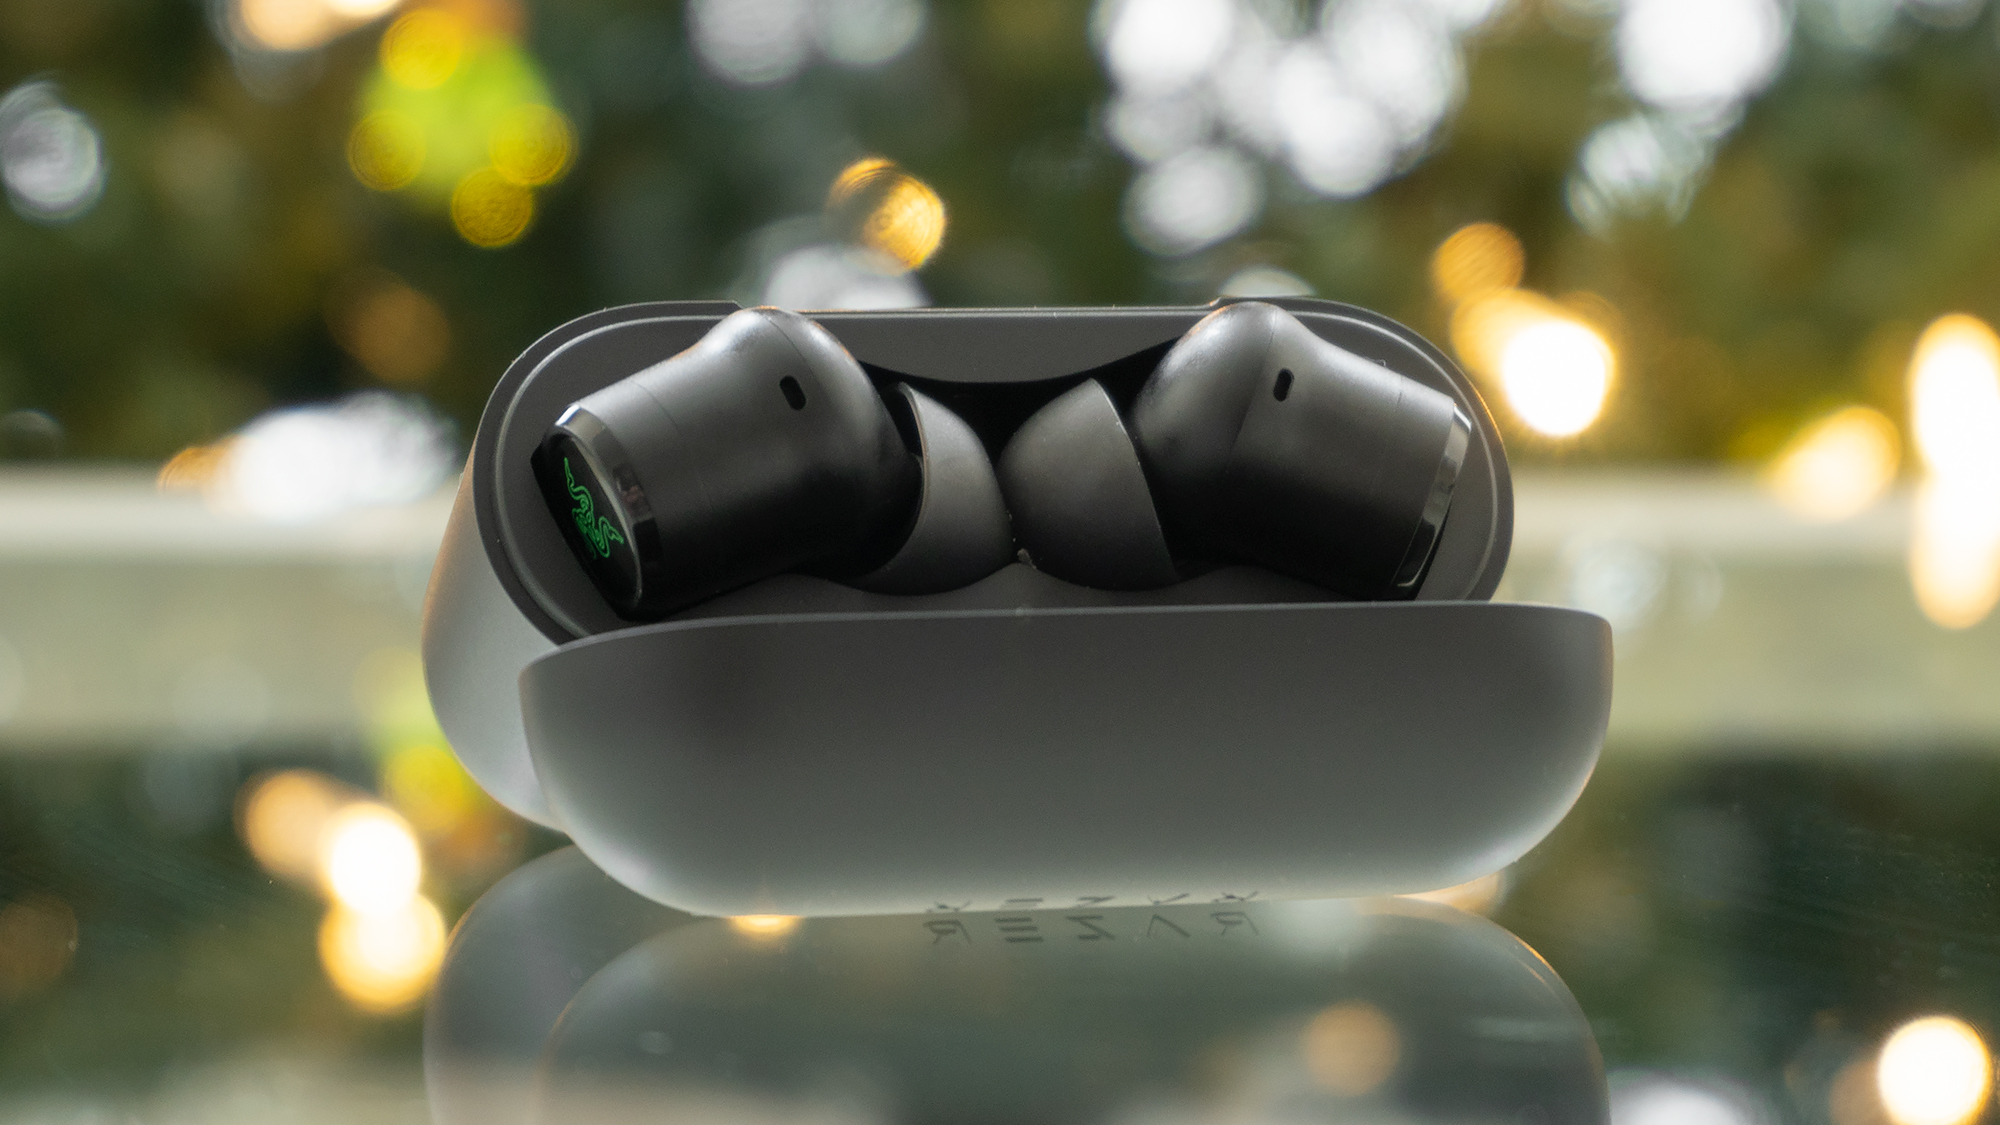 If you're an iPhone user the effortless connectivity with the AirPods Pro is hard to beat, but for $US200 ($269) Razer's Hammerhead True Wireless Pro are an excellent alternative that arguably offer much better sound and customizability. (Photo: Andrew Liszewski / Gizmodo)